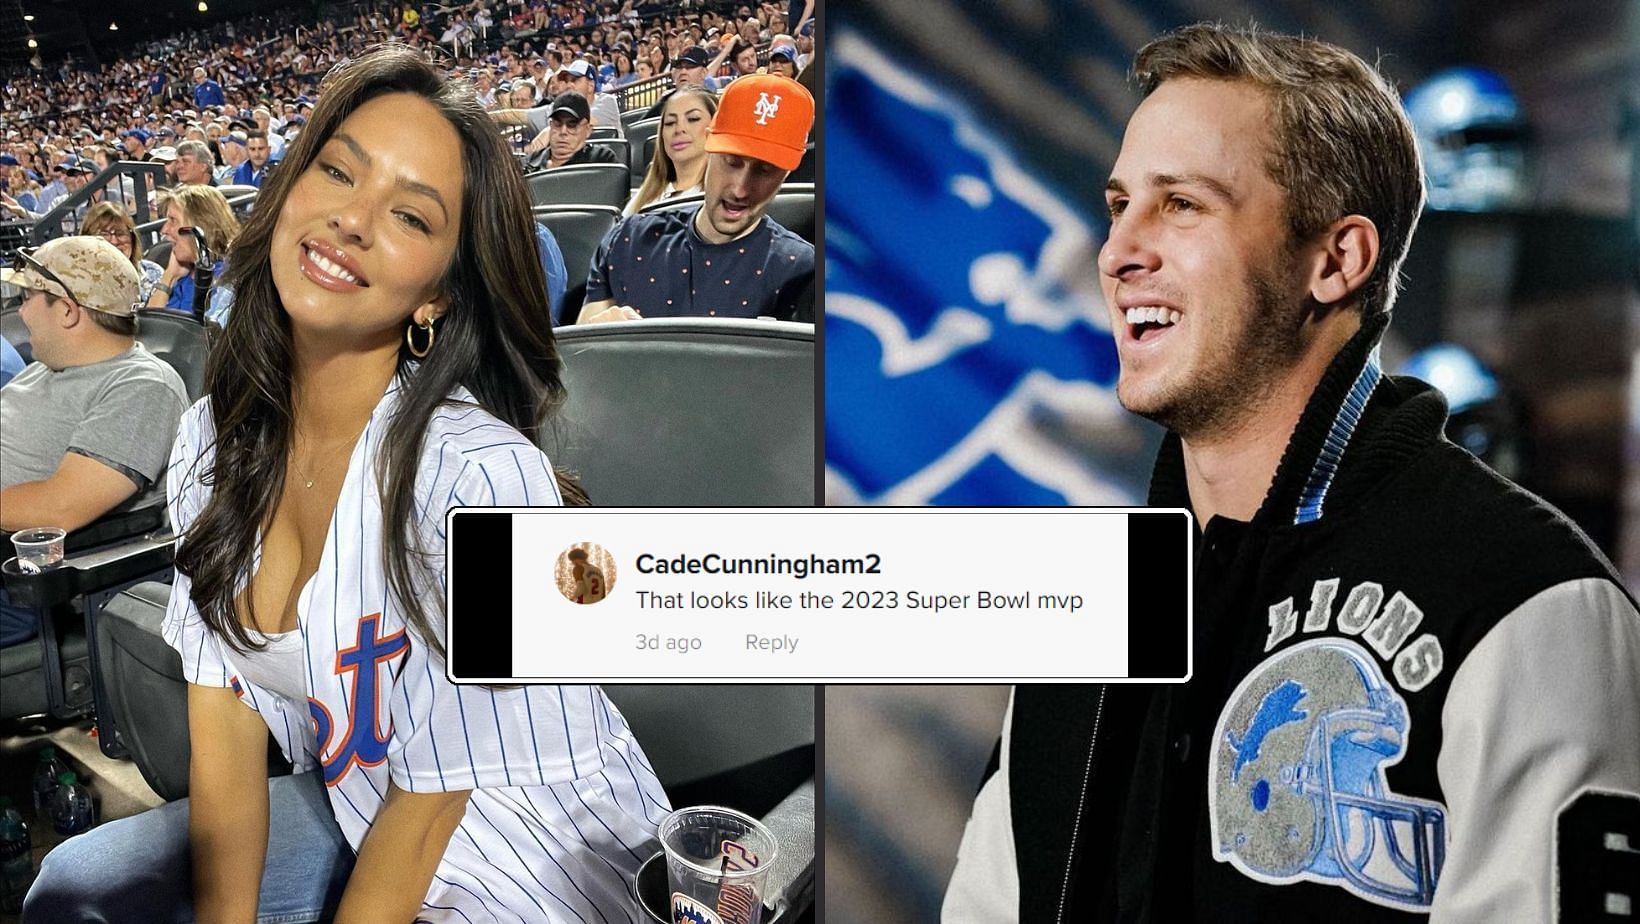 Jared Goff appears to be taking over TikTok in fianc&eacute;e Christen Harper